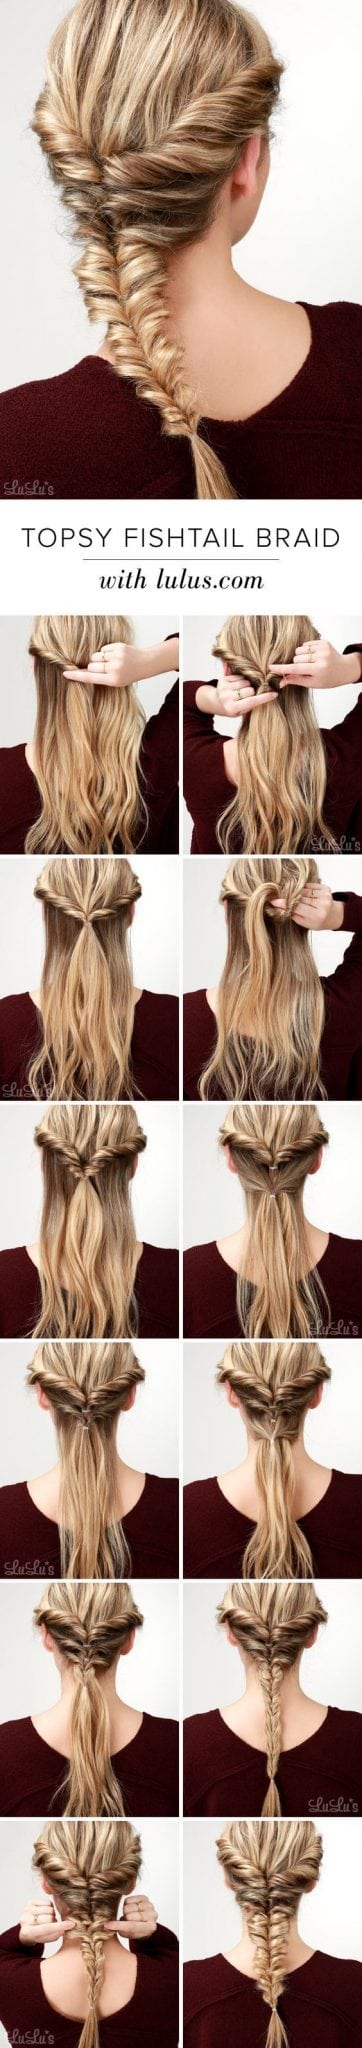 [ad_1]

30 Best Braided Hairstyles That Turn Heads – Page 2 of 5 – Trend To Wear
Source by trend2wear
[ad_2]
			
			…